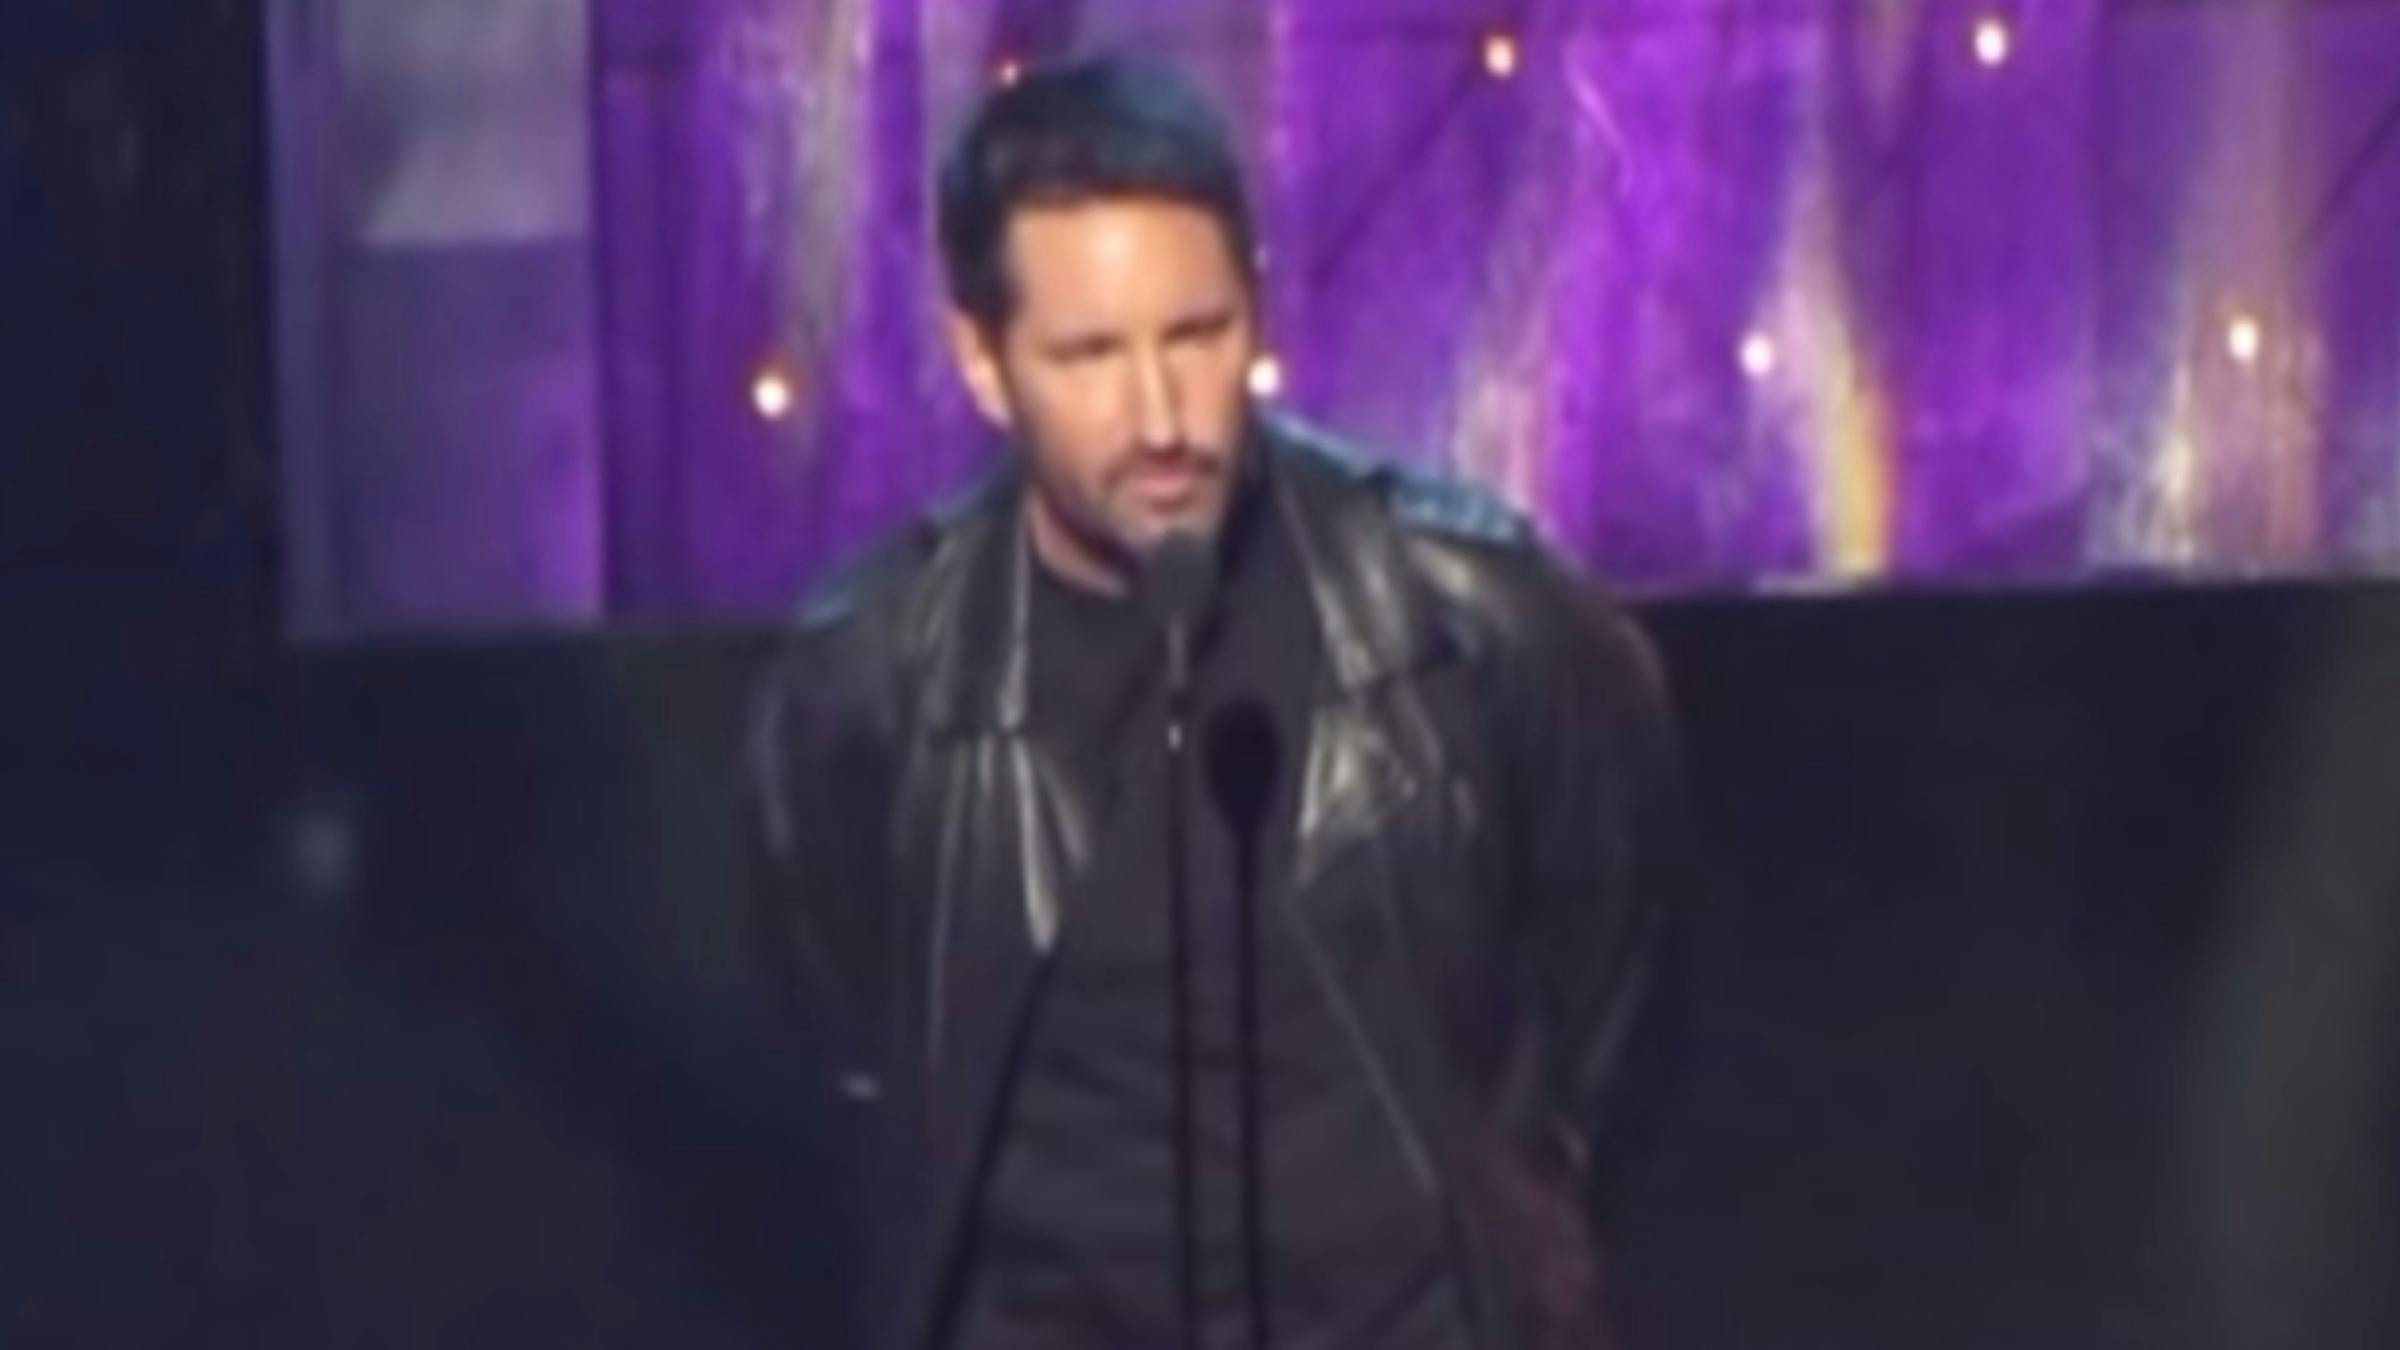 Here's Trent Reznor's Speech Inducting The Cure Into The Rock & Roll Hall Of Fame